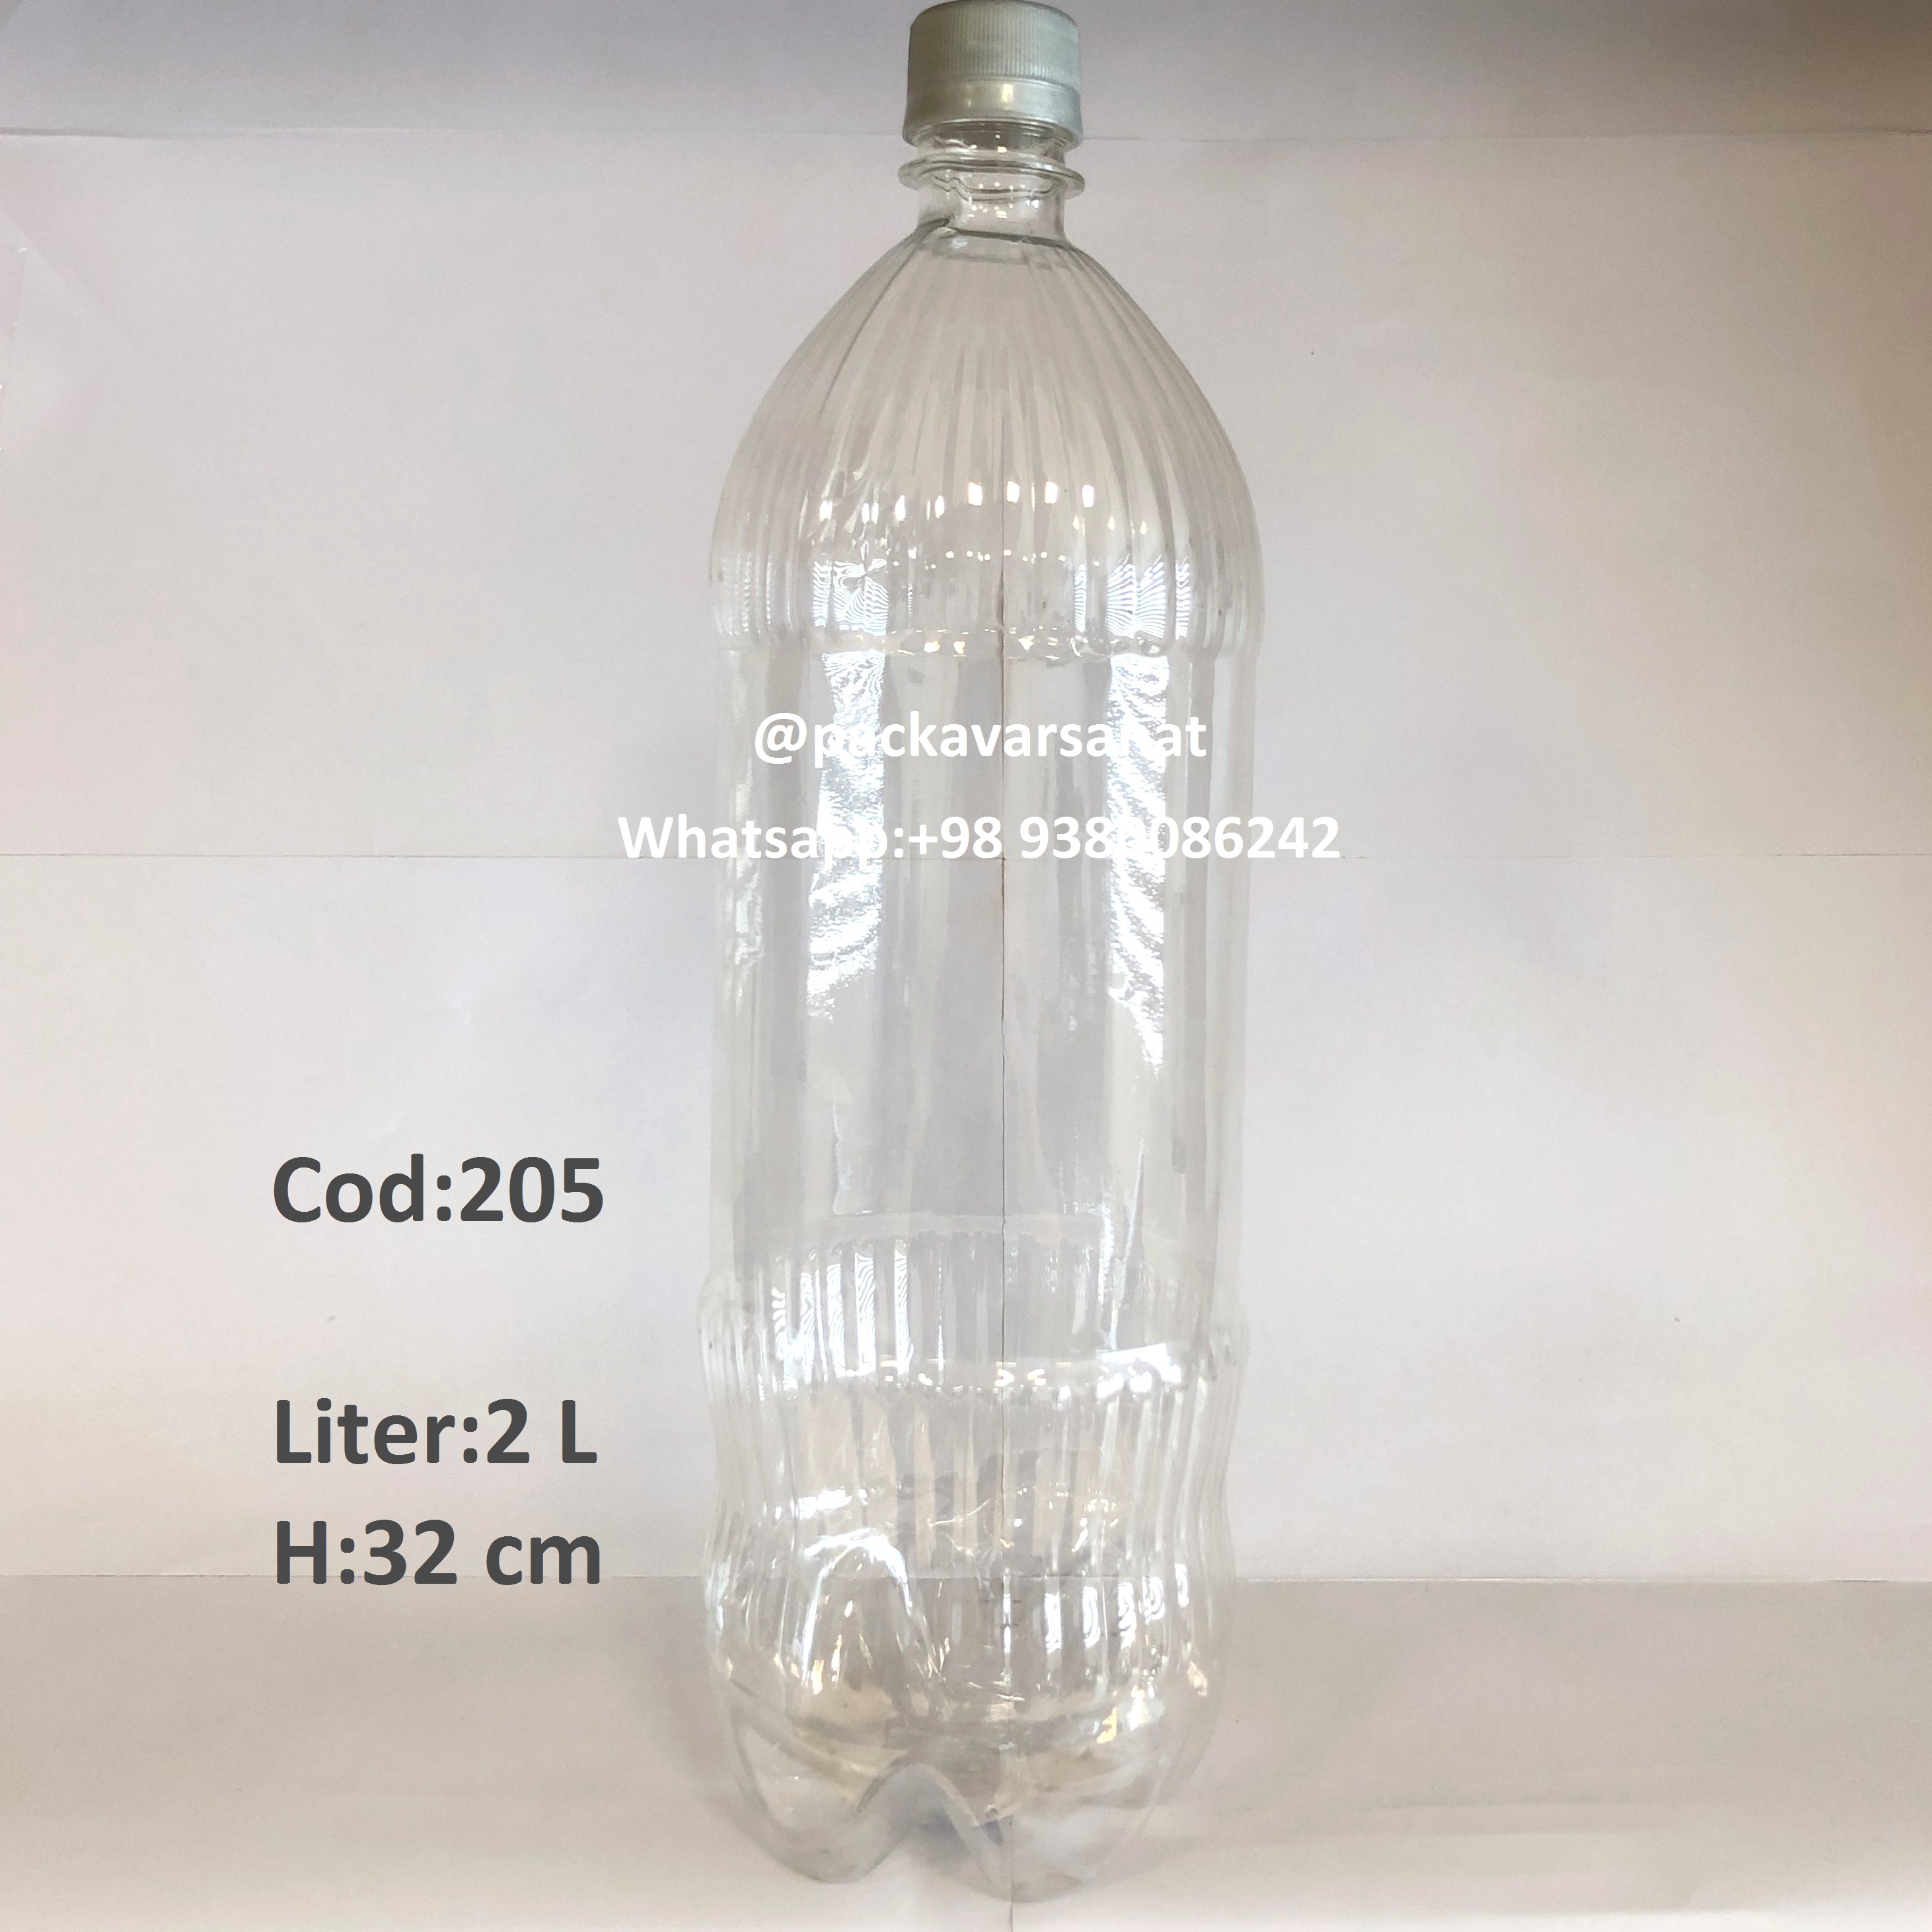 You are currently viewing 2 liters